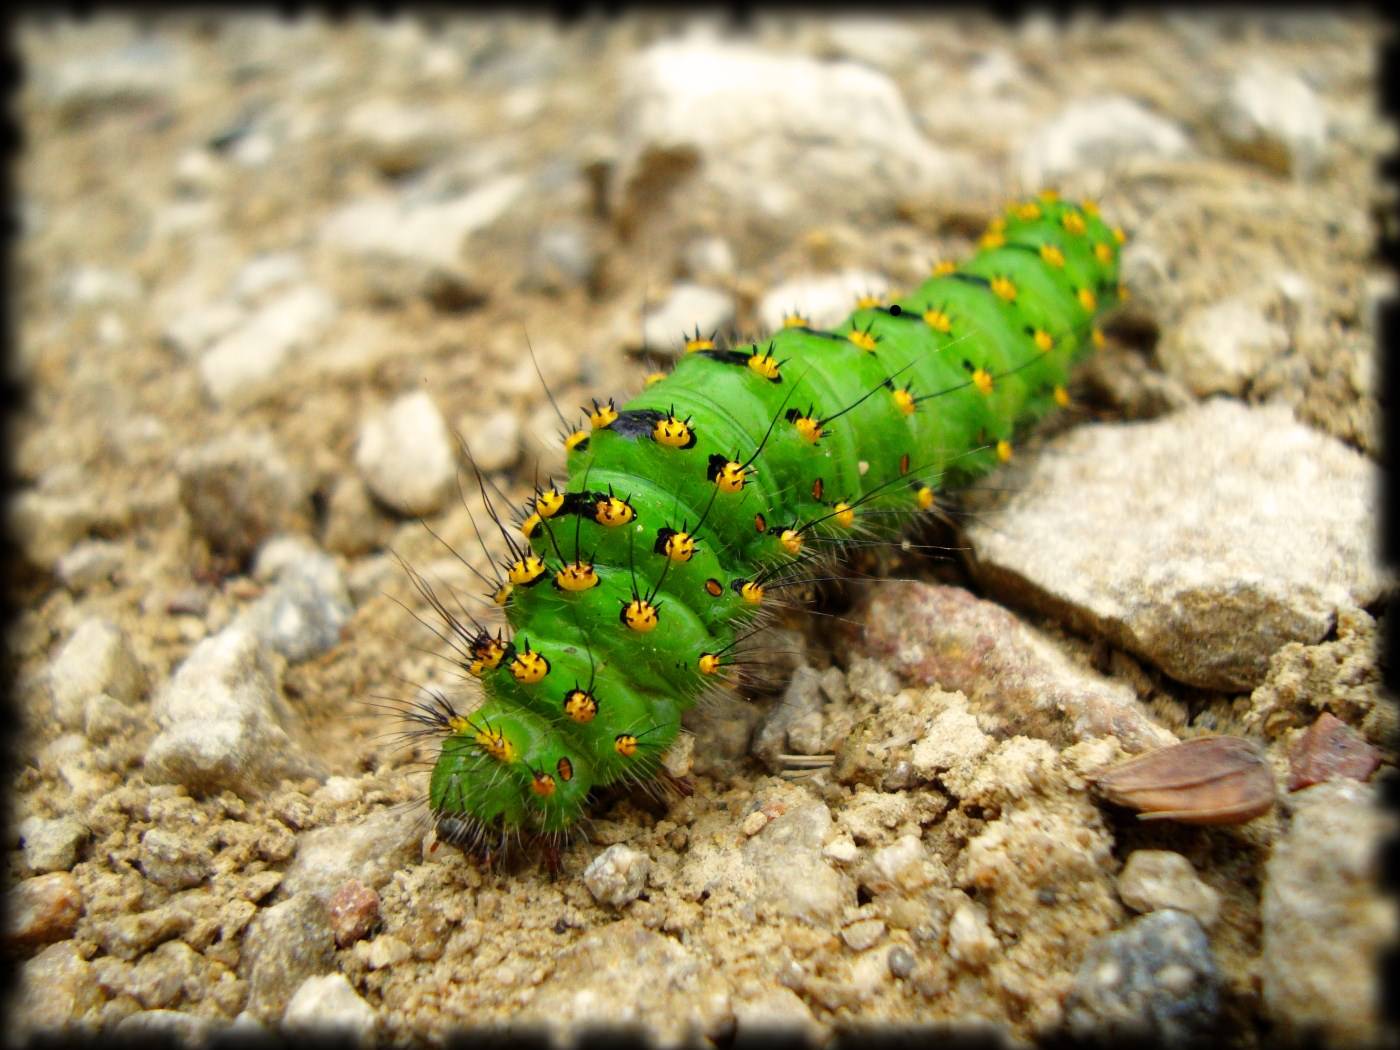 Chenilles Green Caterpillar with Yellow Dots